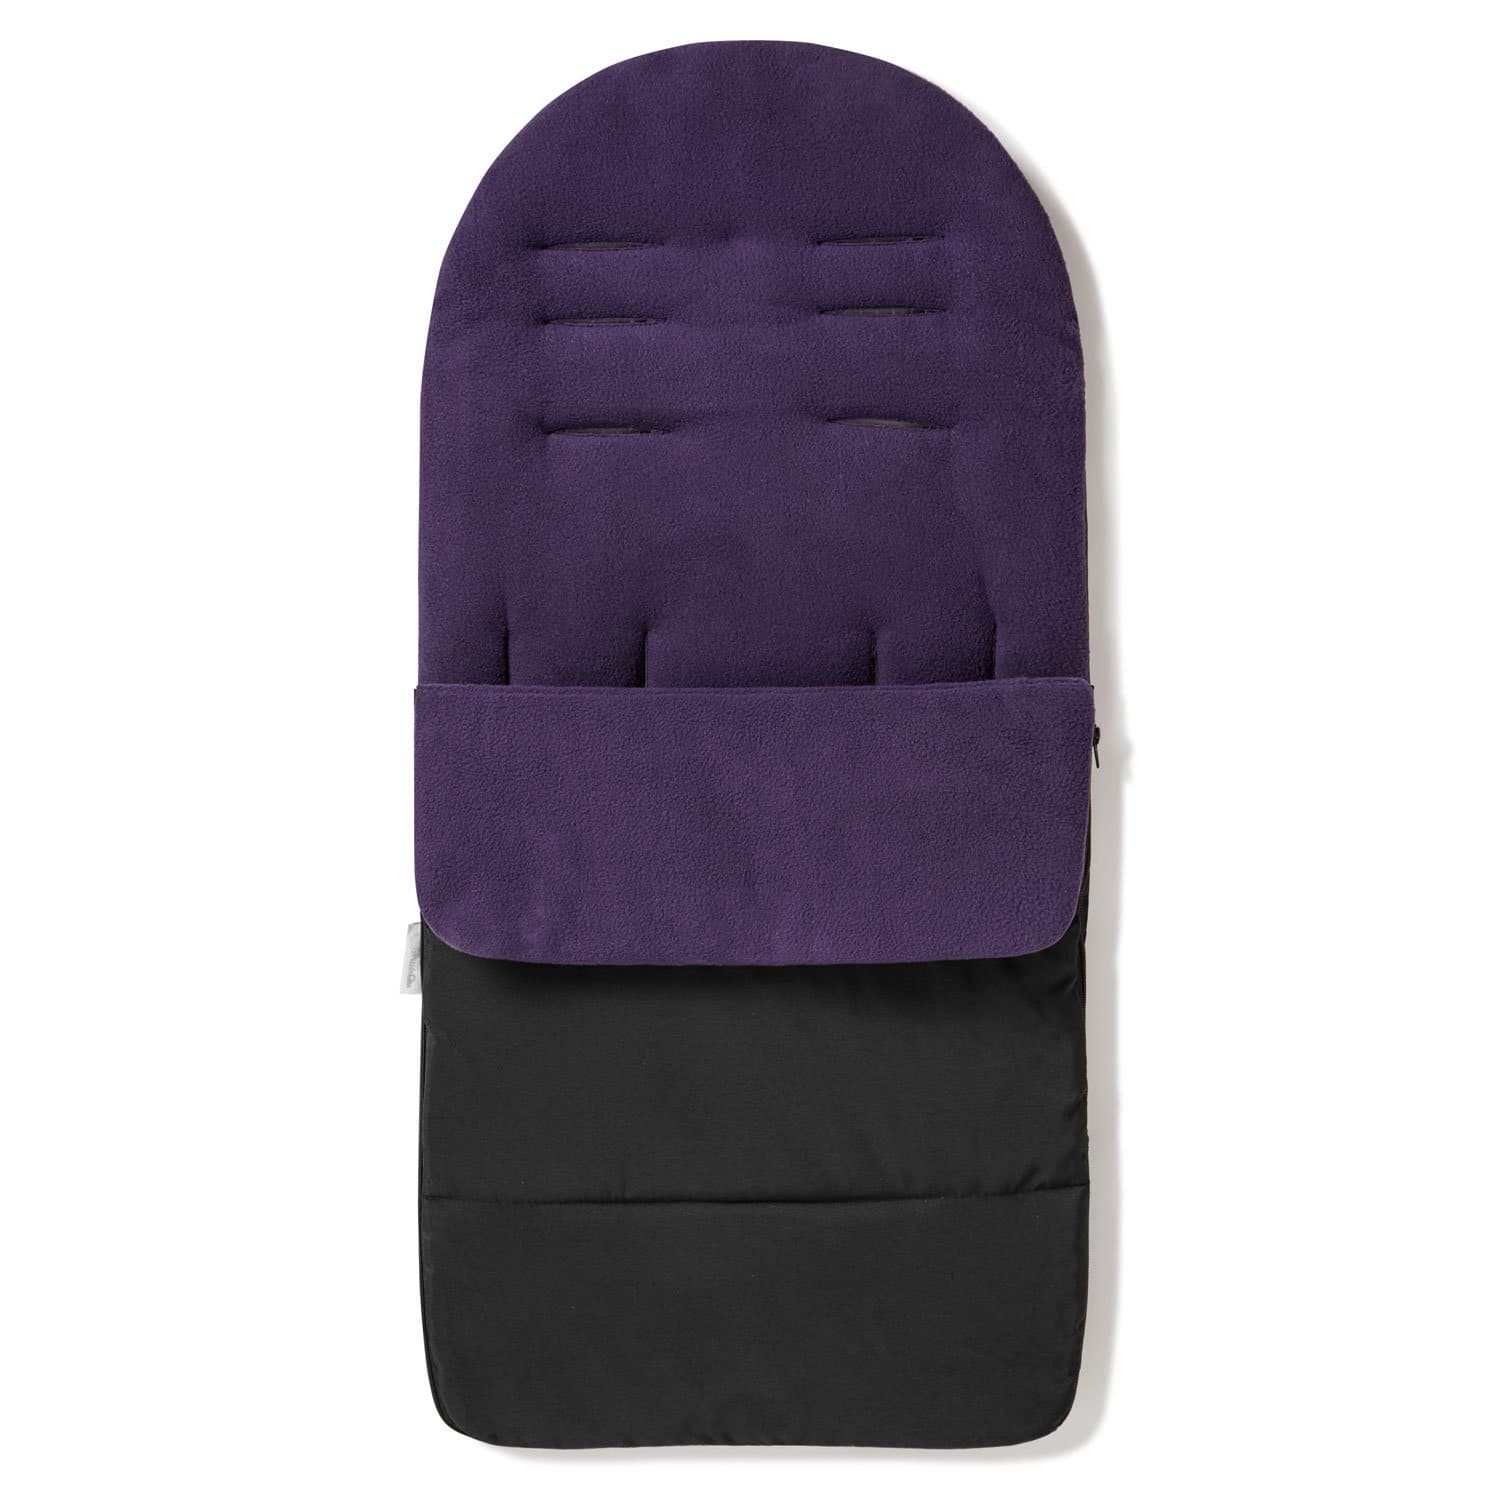 Premium Footmuff / Cosy Toes Compatible with Kids Kargo - Plum Purple / Fits All Models | For Your Little One